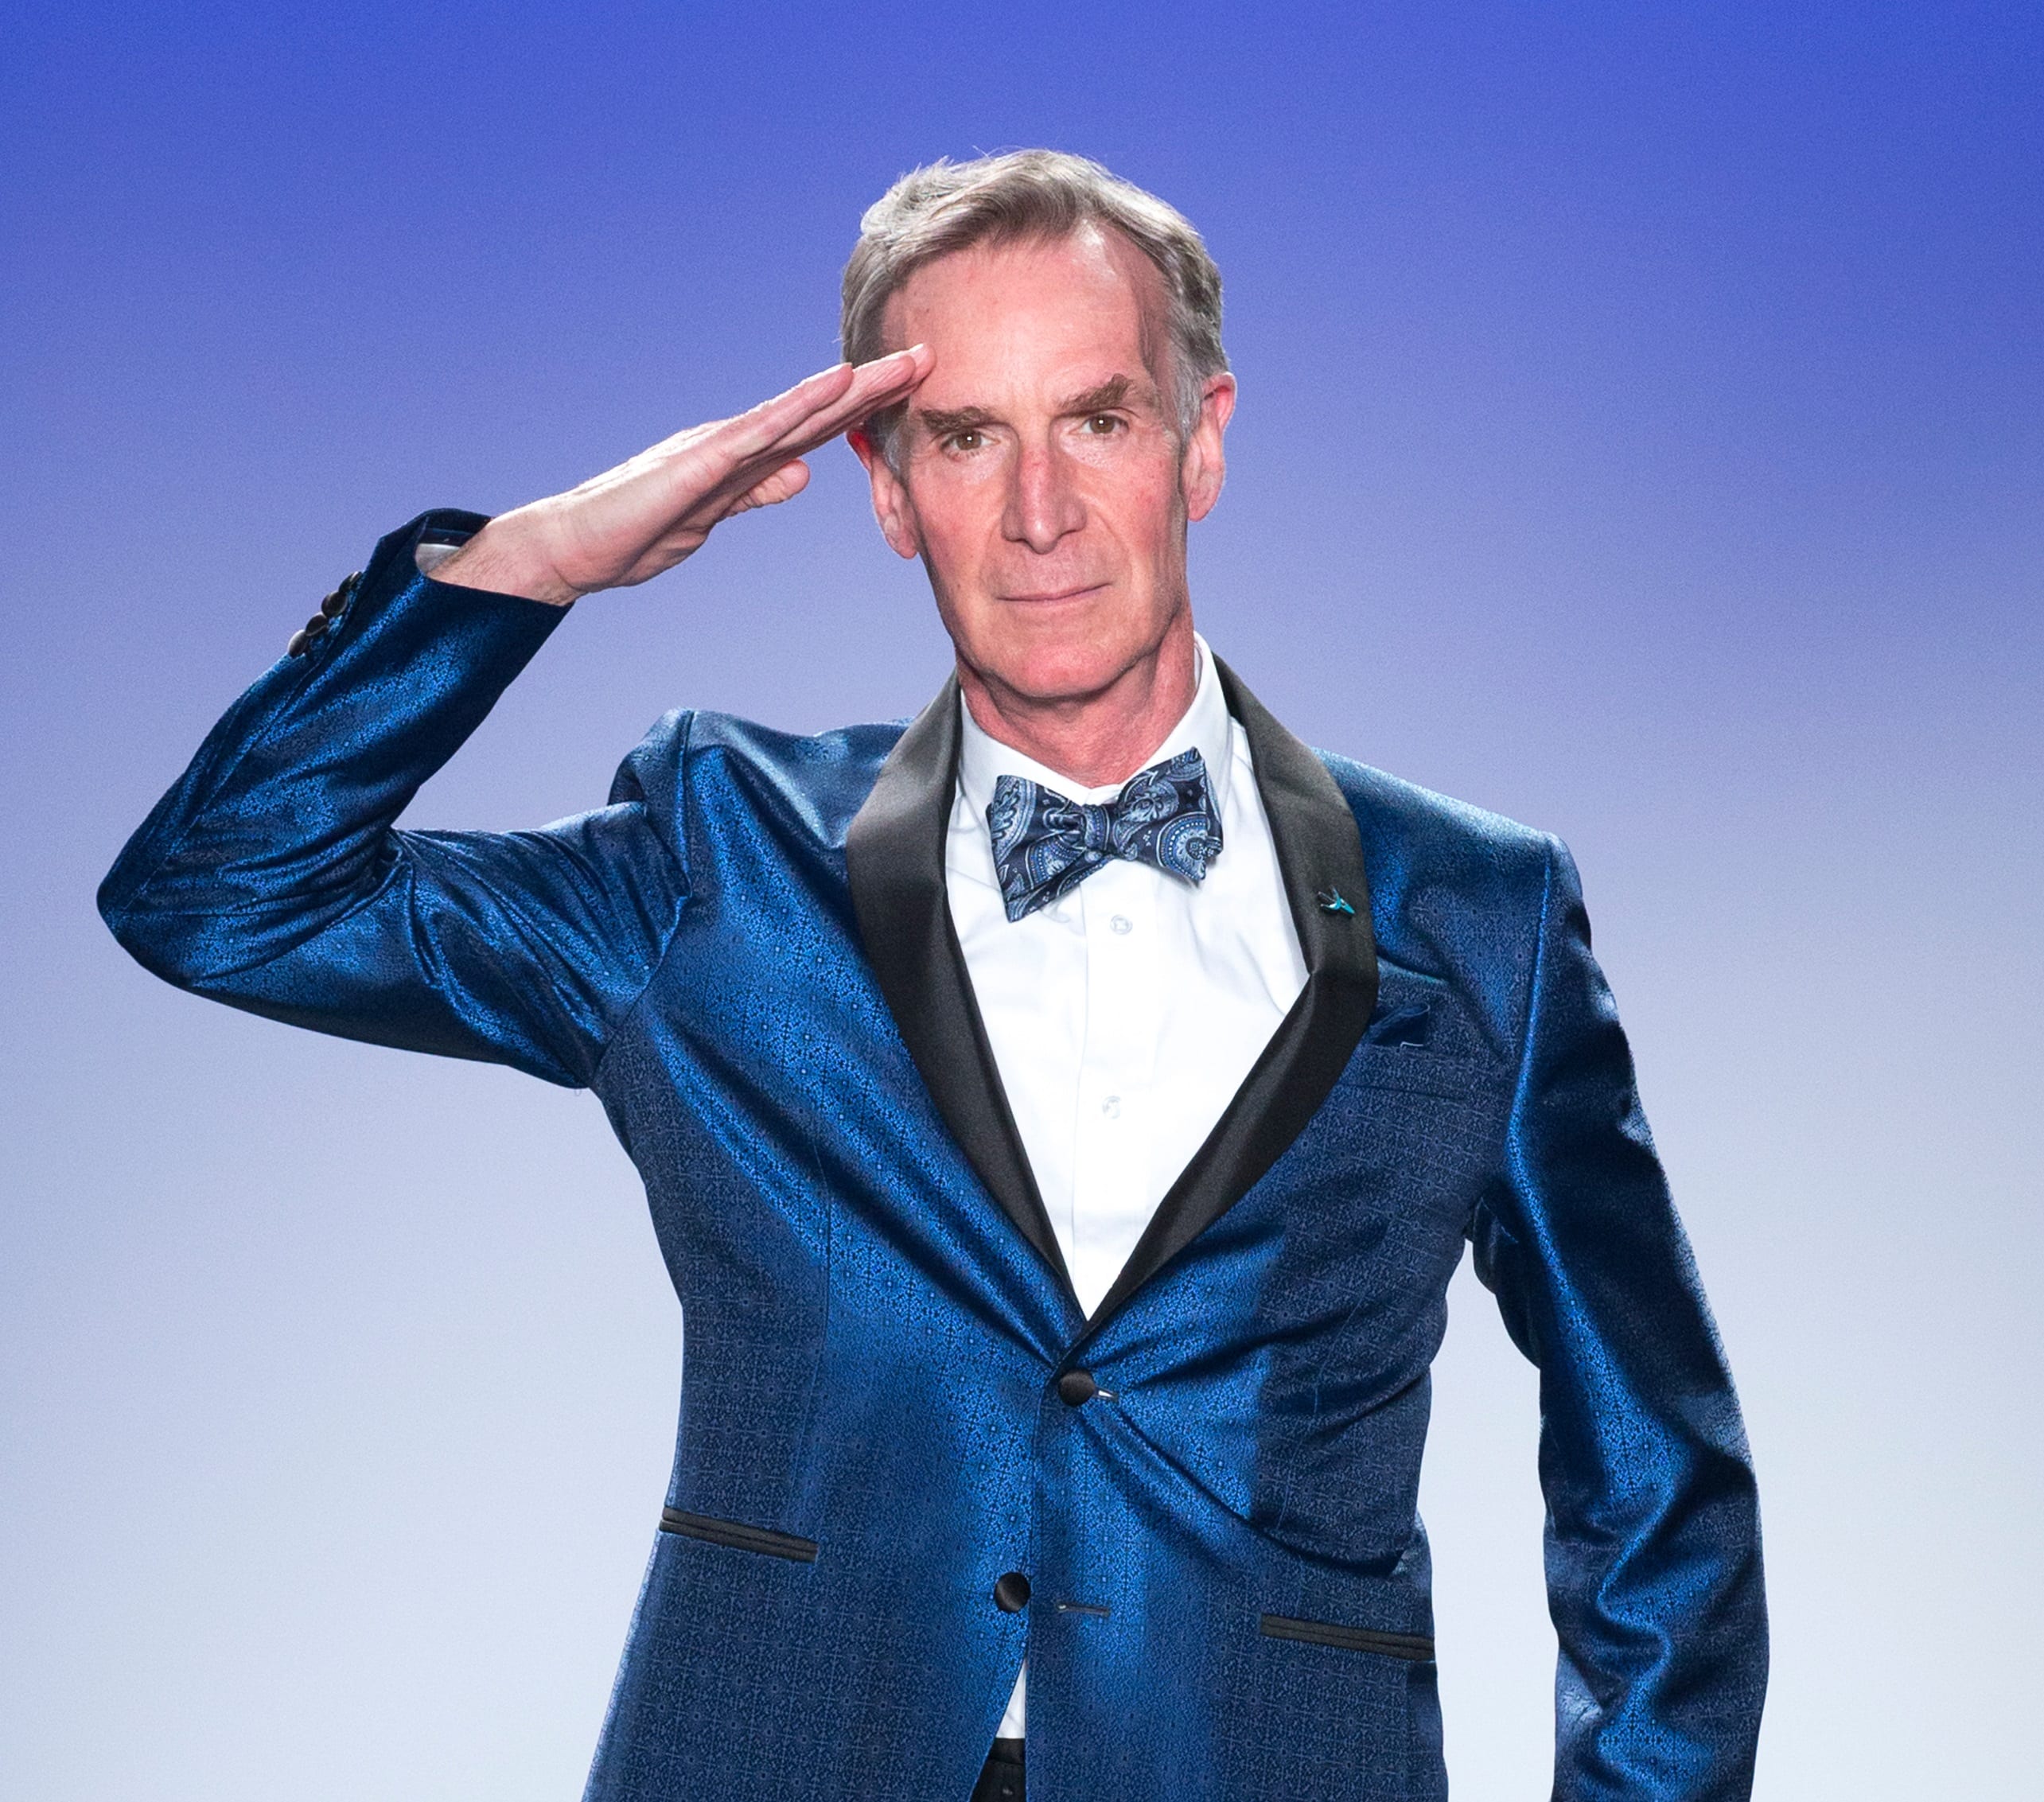 What does Bill Nye the Science Guy think of marijuana? 